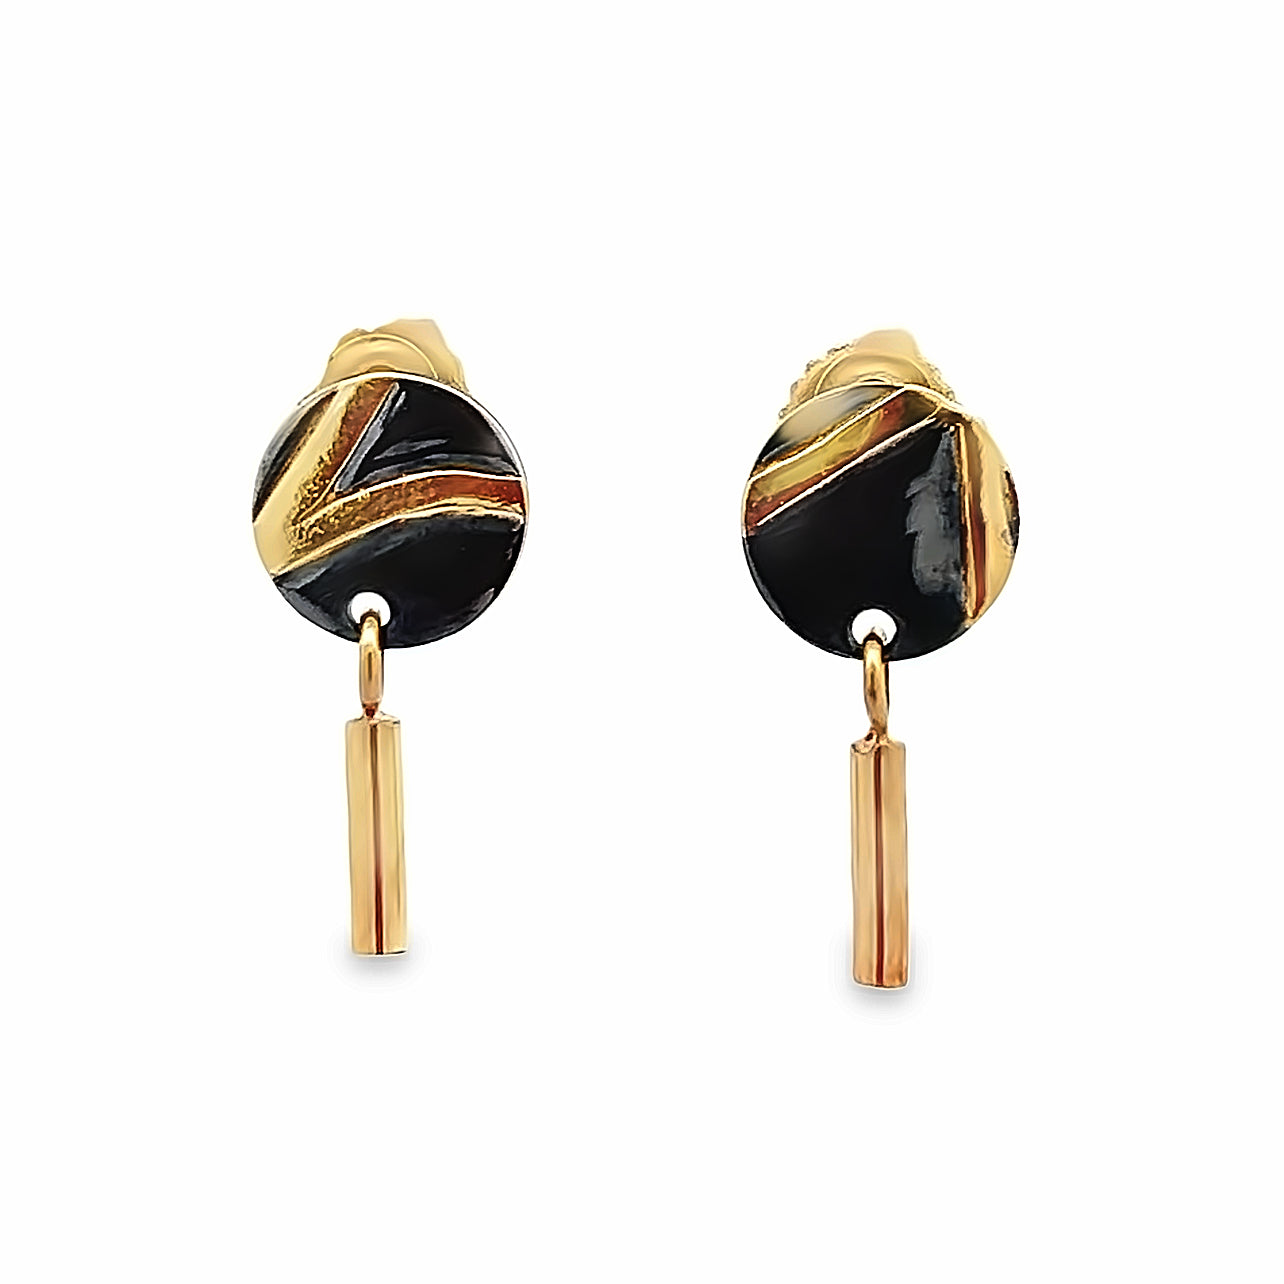 Oxidized Sterling Silver and 18k Yellow Gold Pathways Earrings by Paul Richter